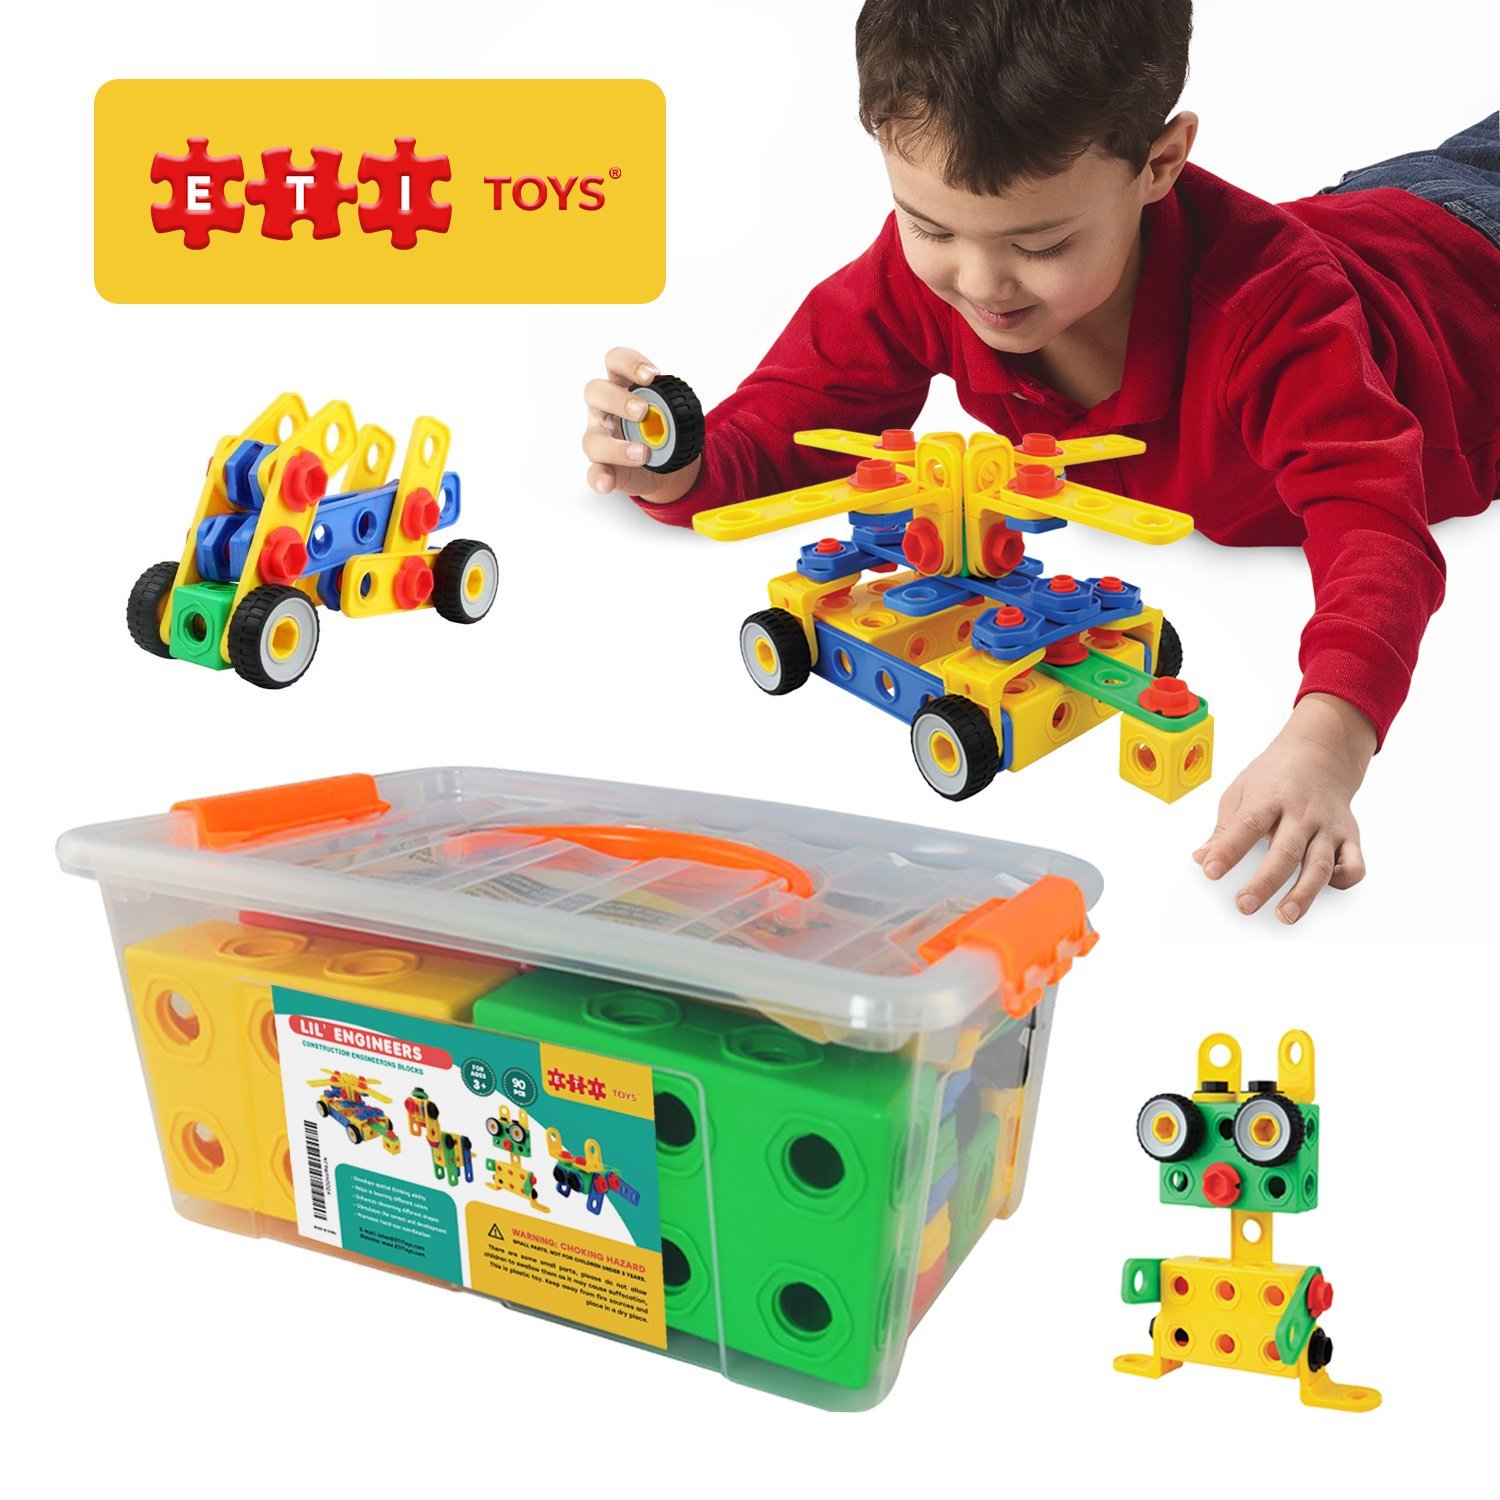 The Best Engineering Toys for Kids - Early Childhood ...